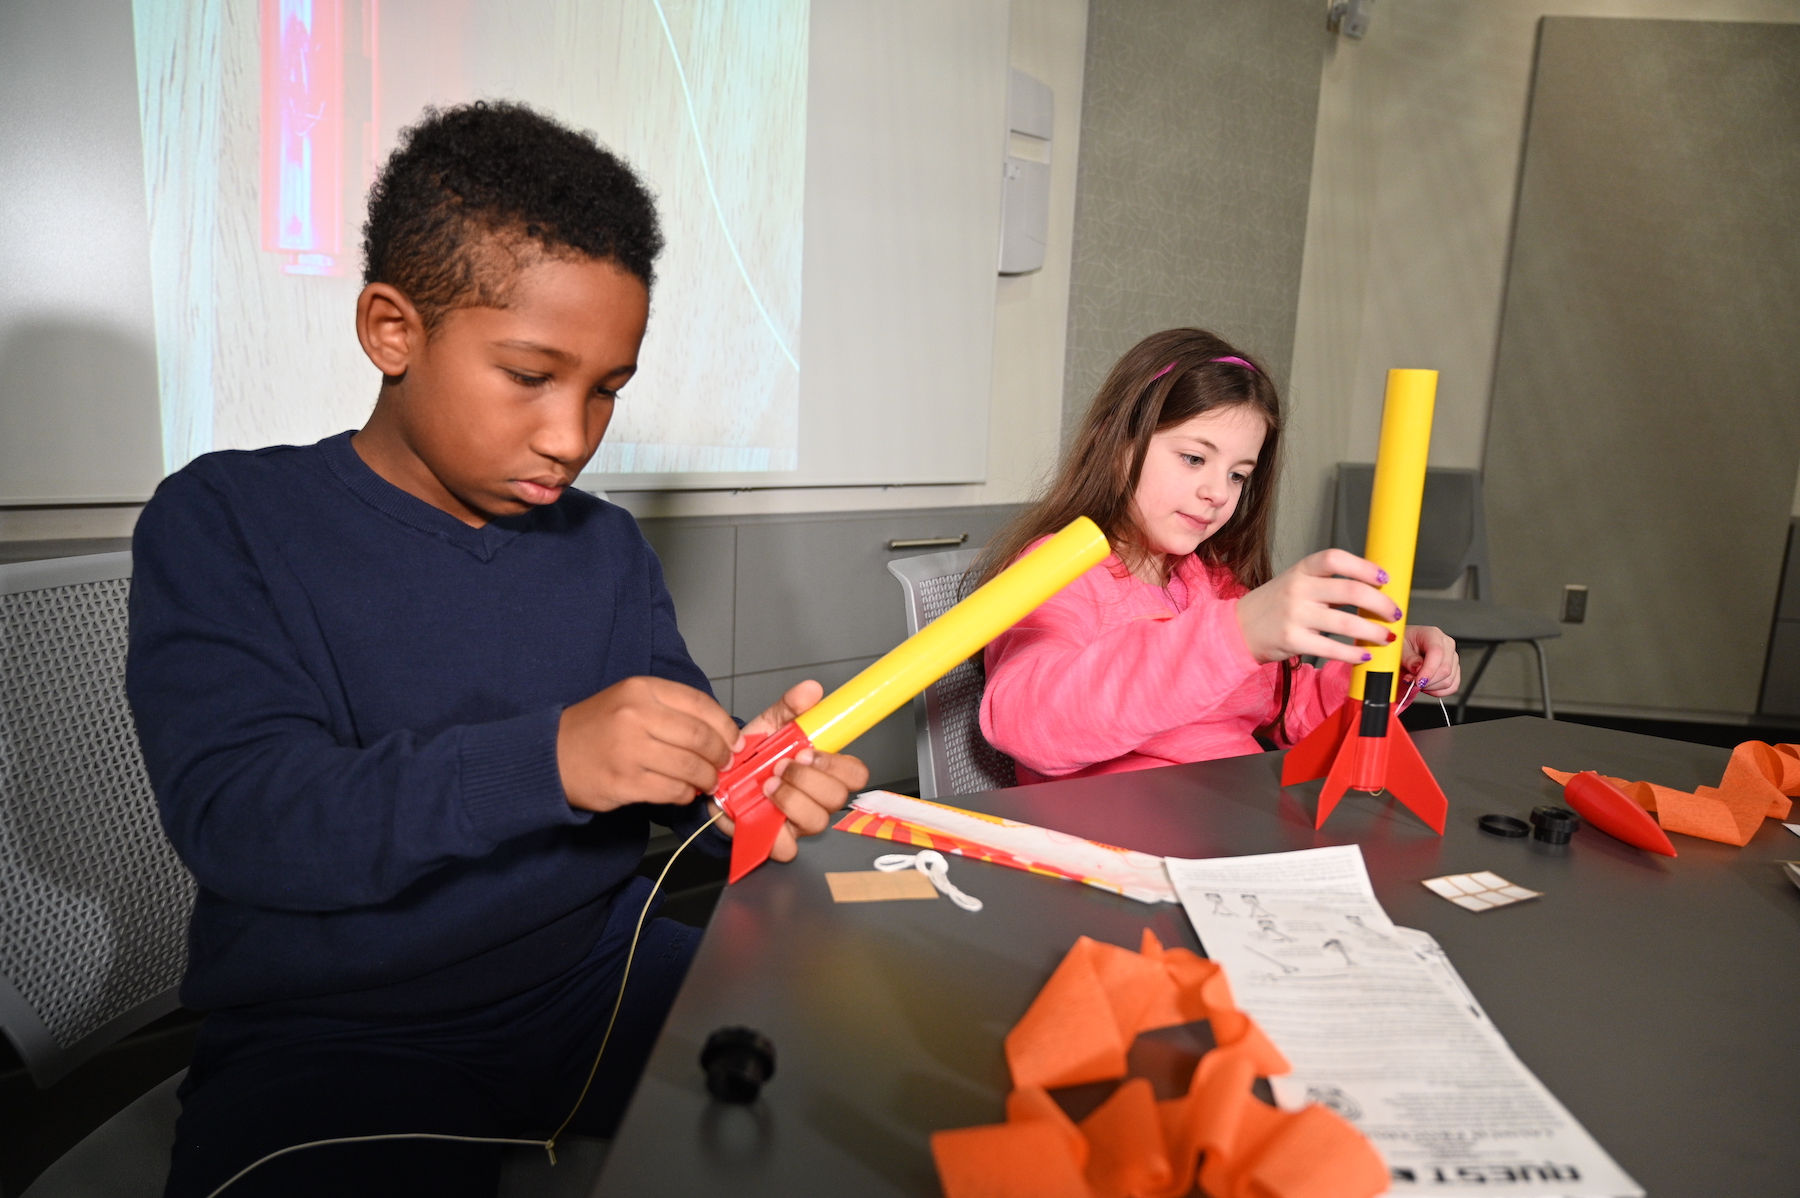 Image of two yound students sitting at a table buidling model rockets.